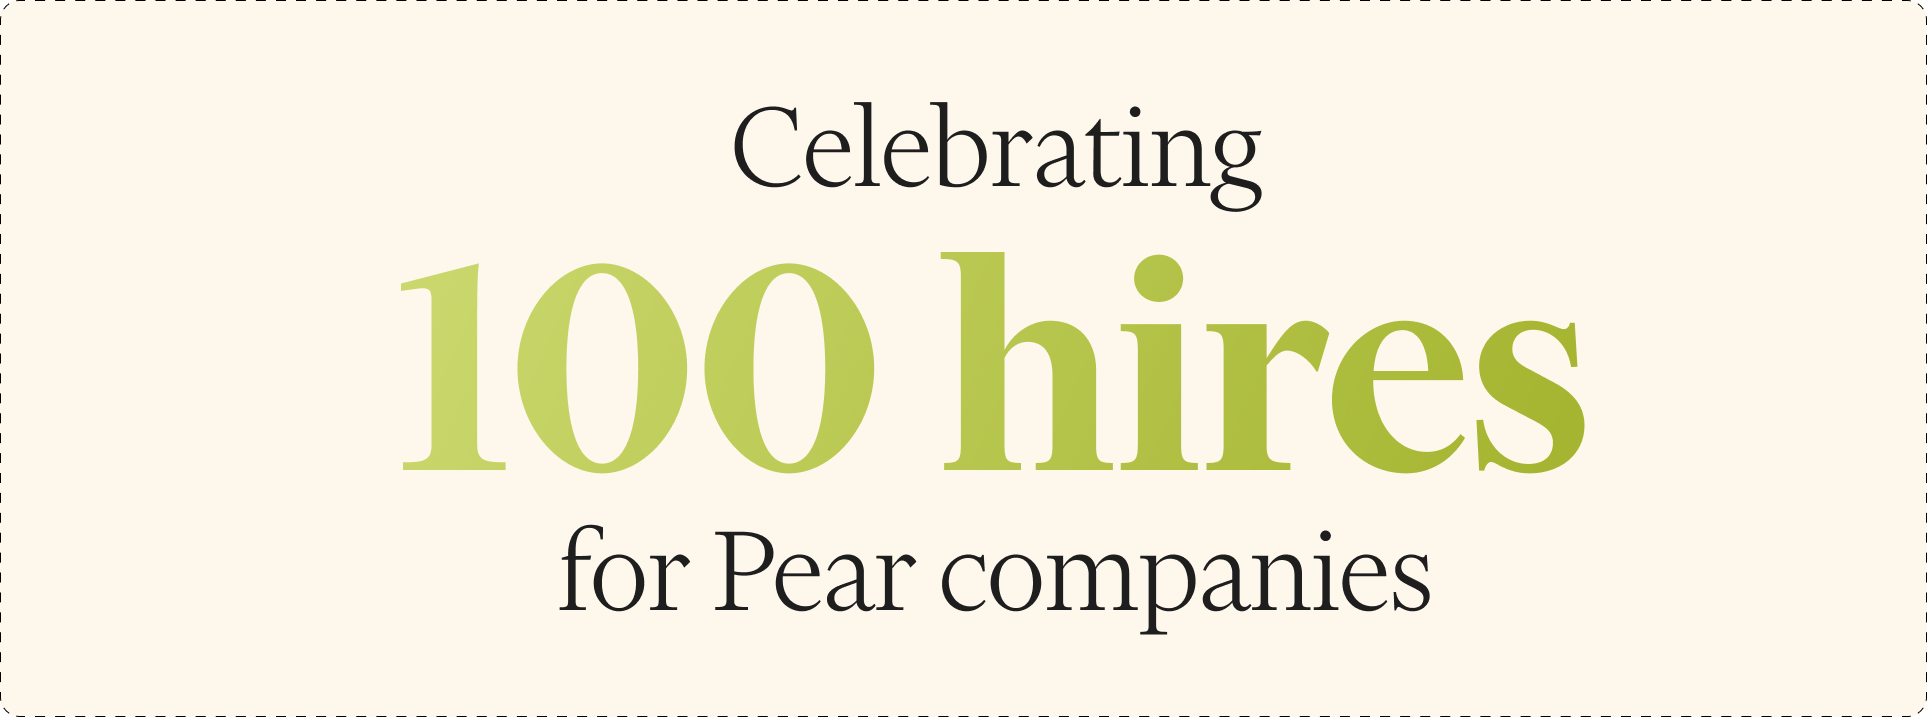 Celebrating 100 hires for Pear companies 🥳